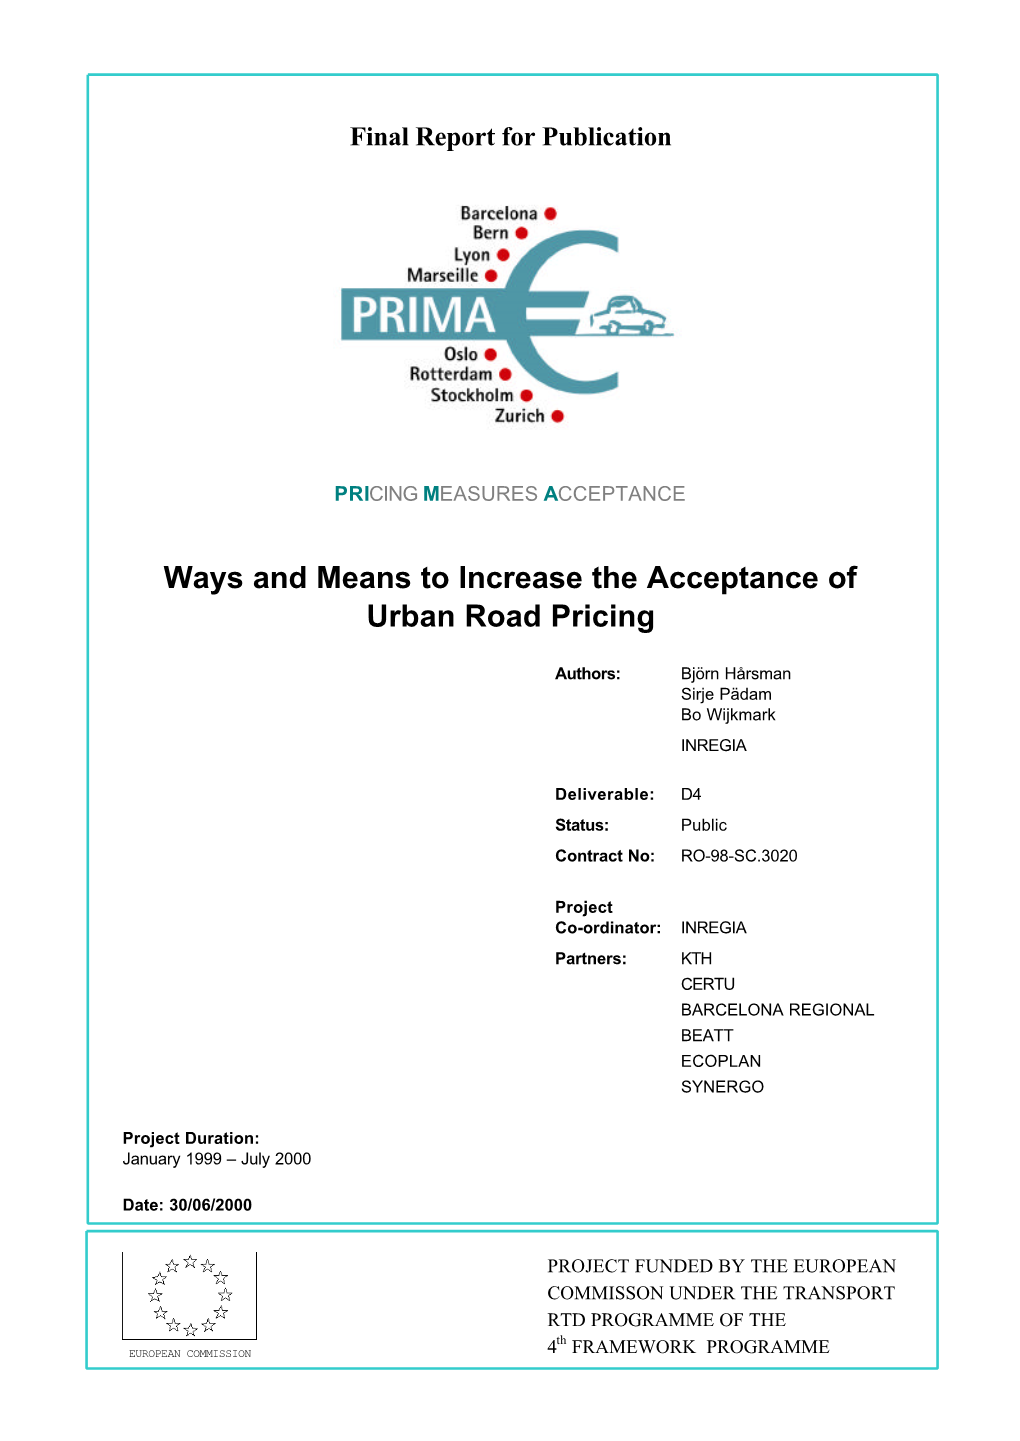 Ways and Means to Increase the Acceptance of Urban Road Pricing